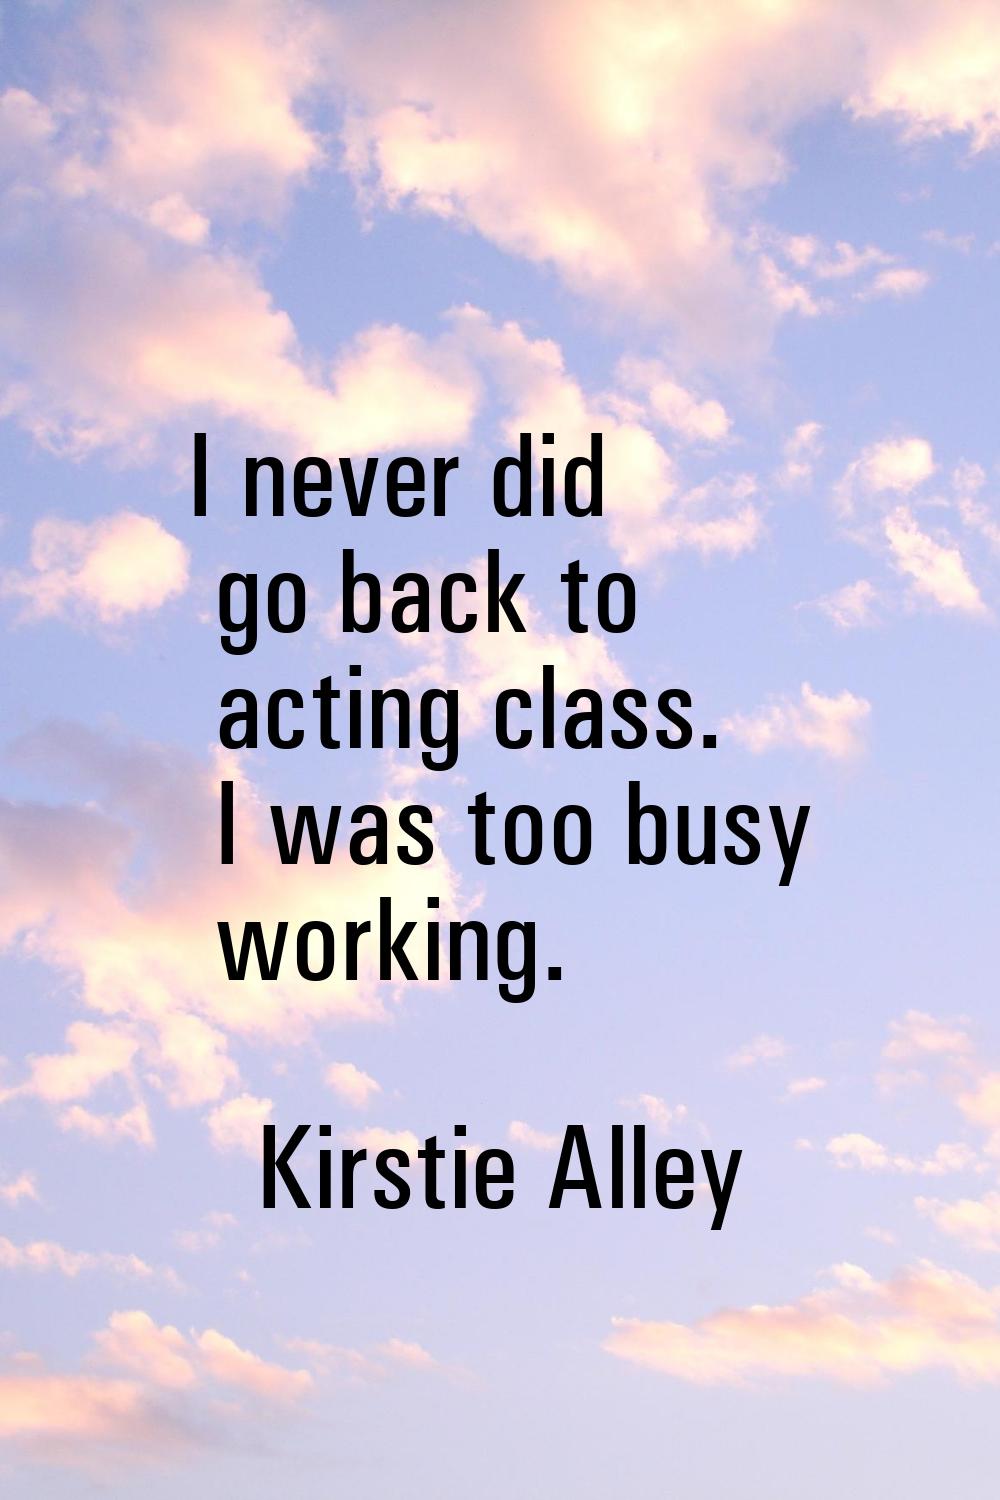 I never did go back to acting class. I was too busy working.